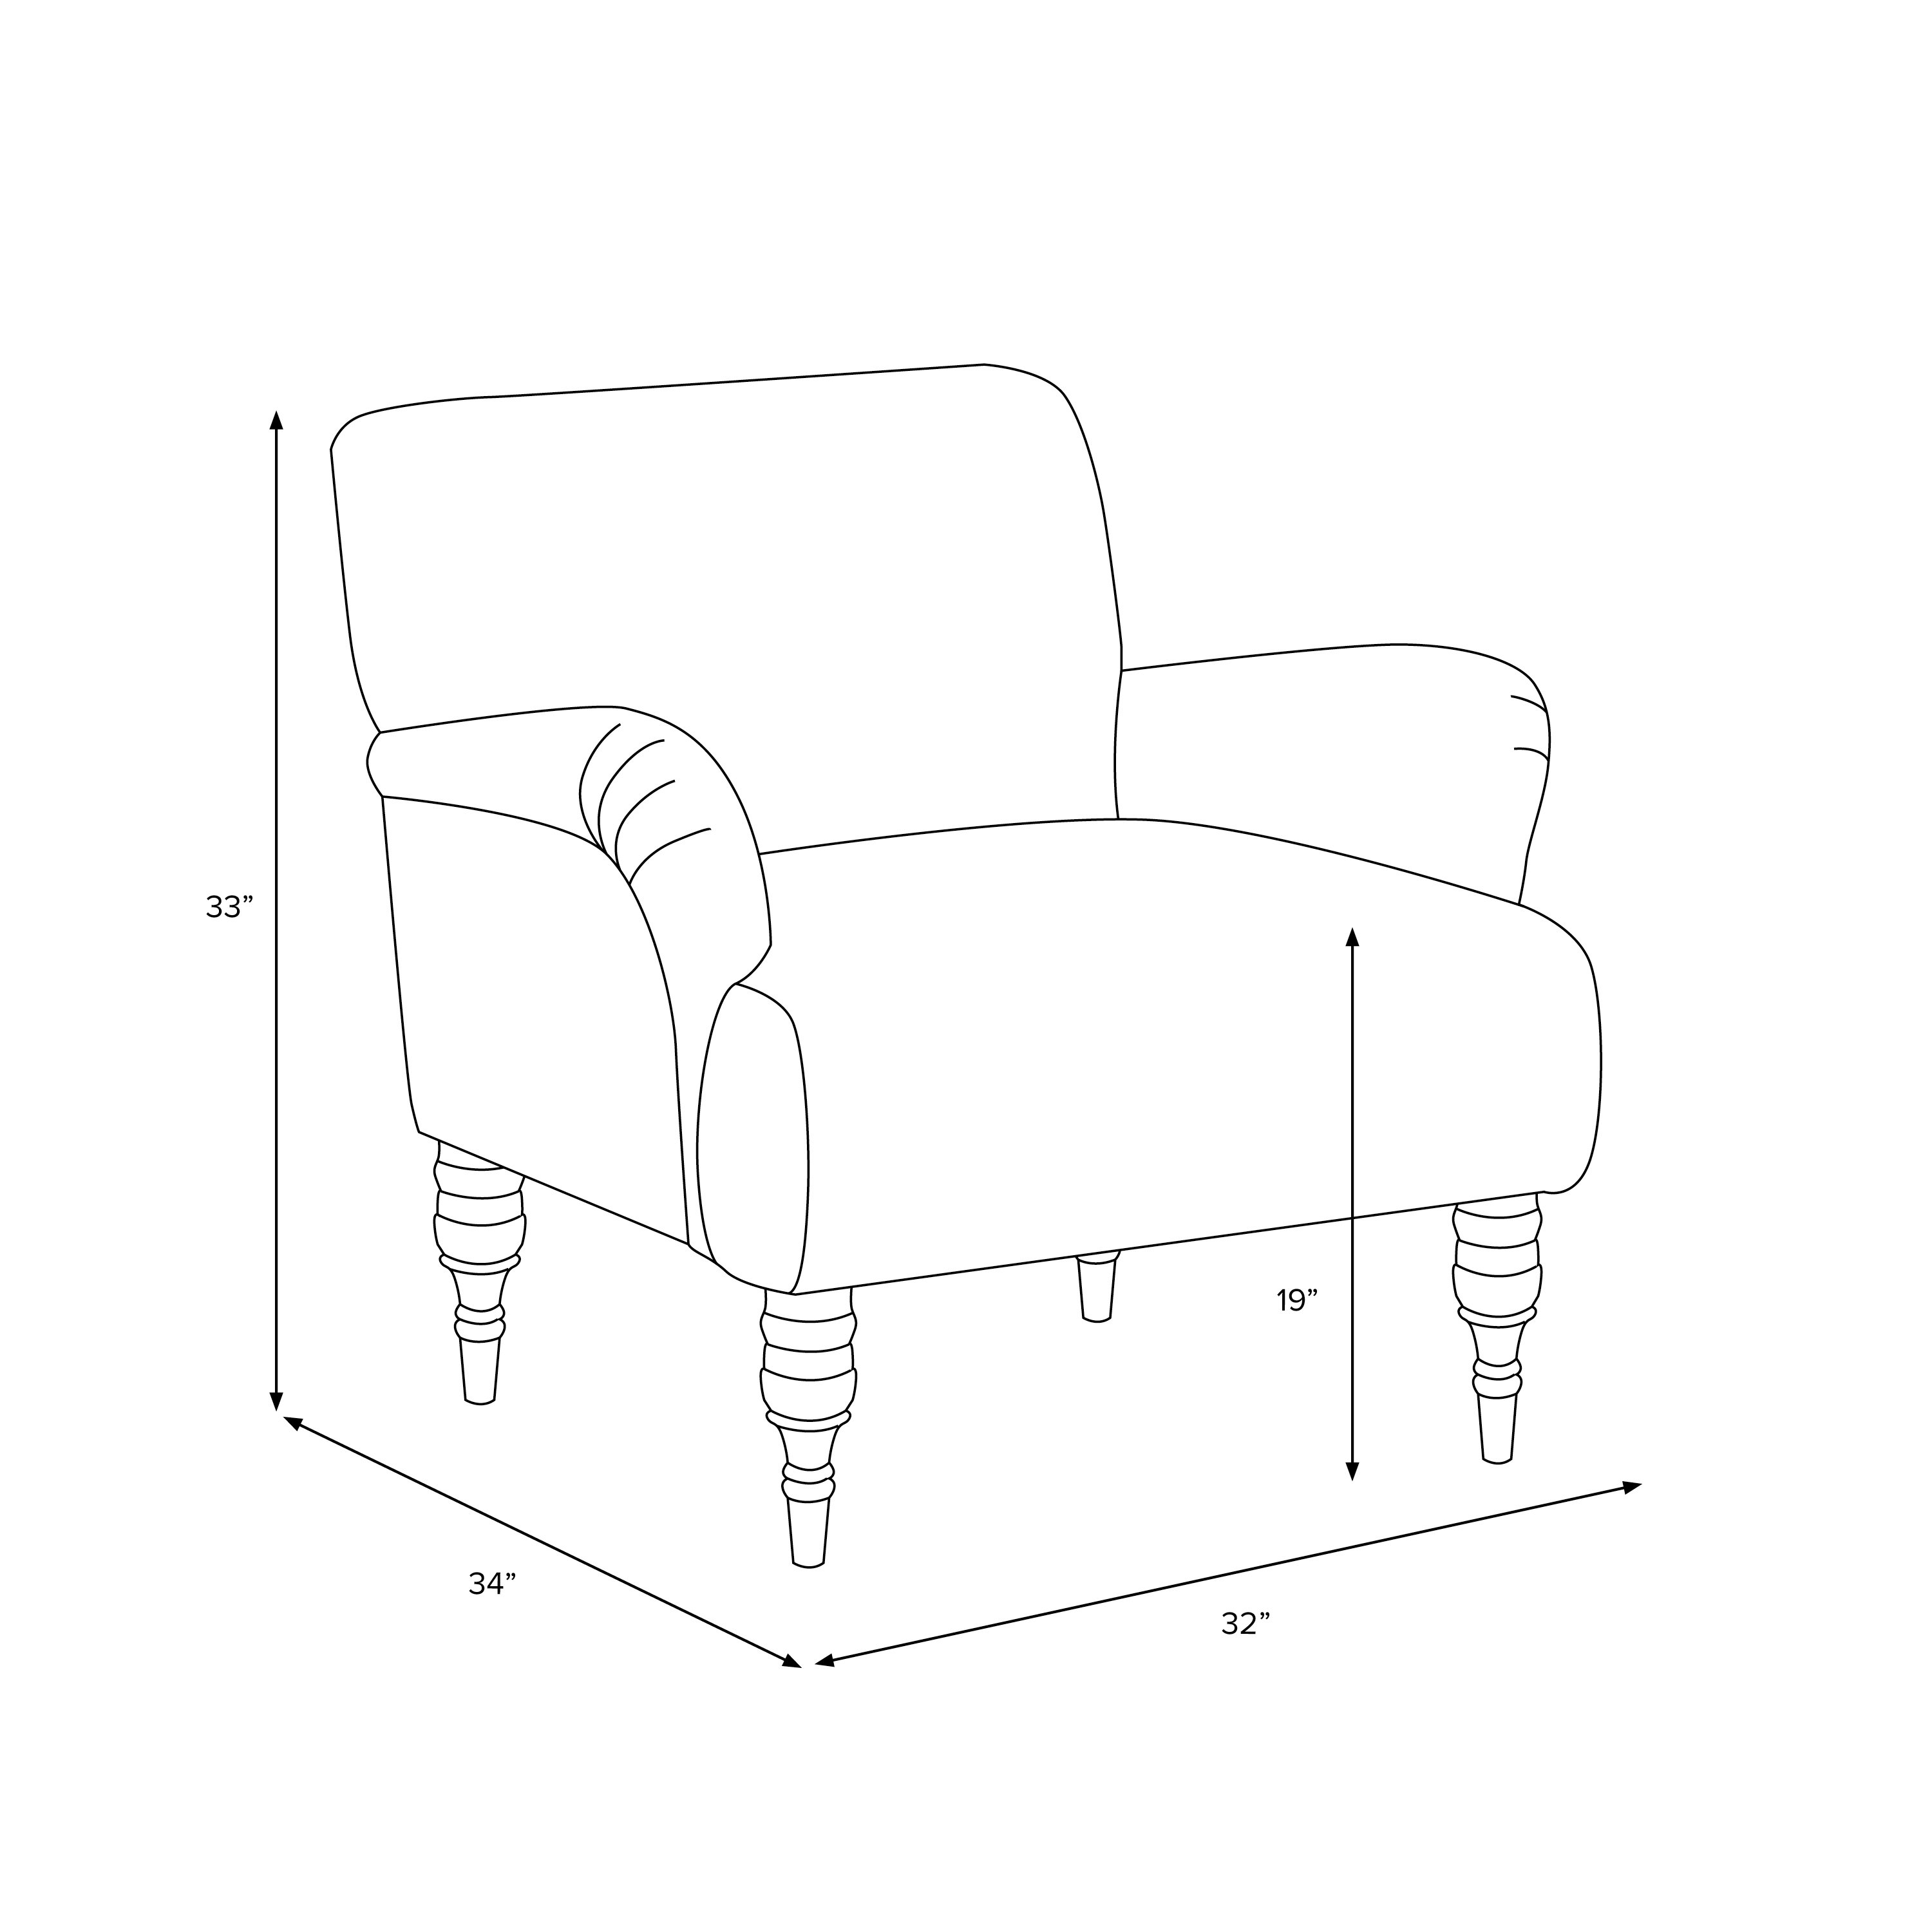 Vyolet Accent Chair - Image 6